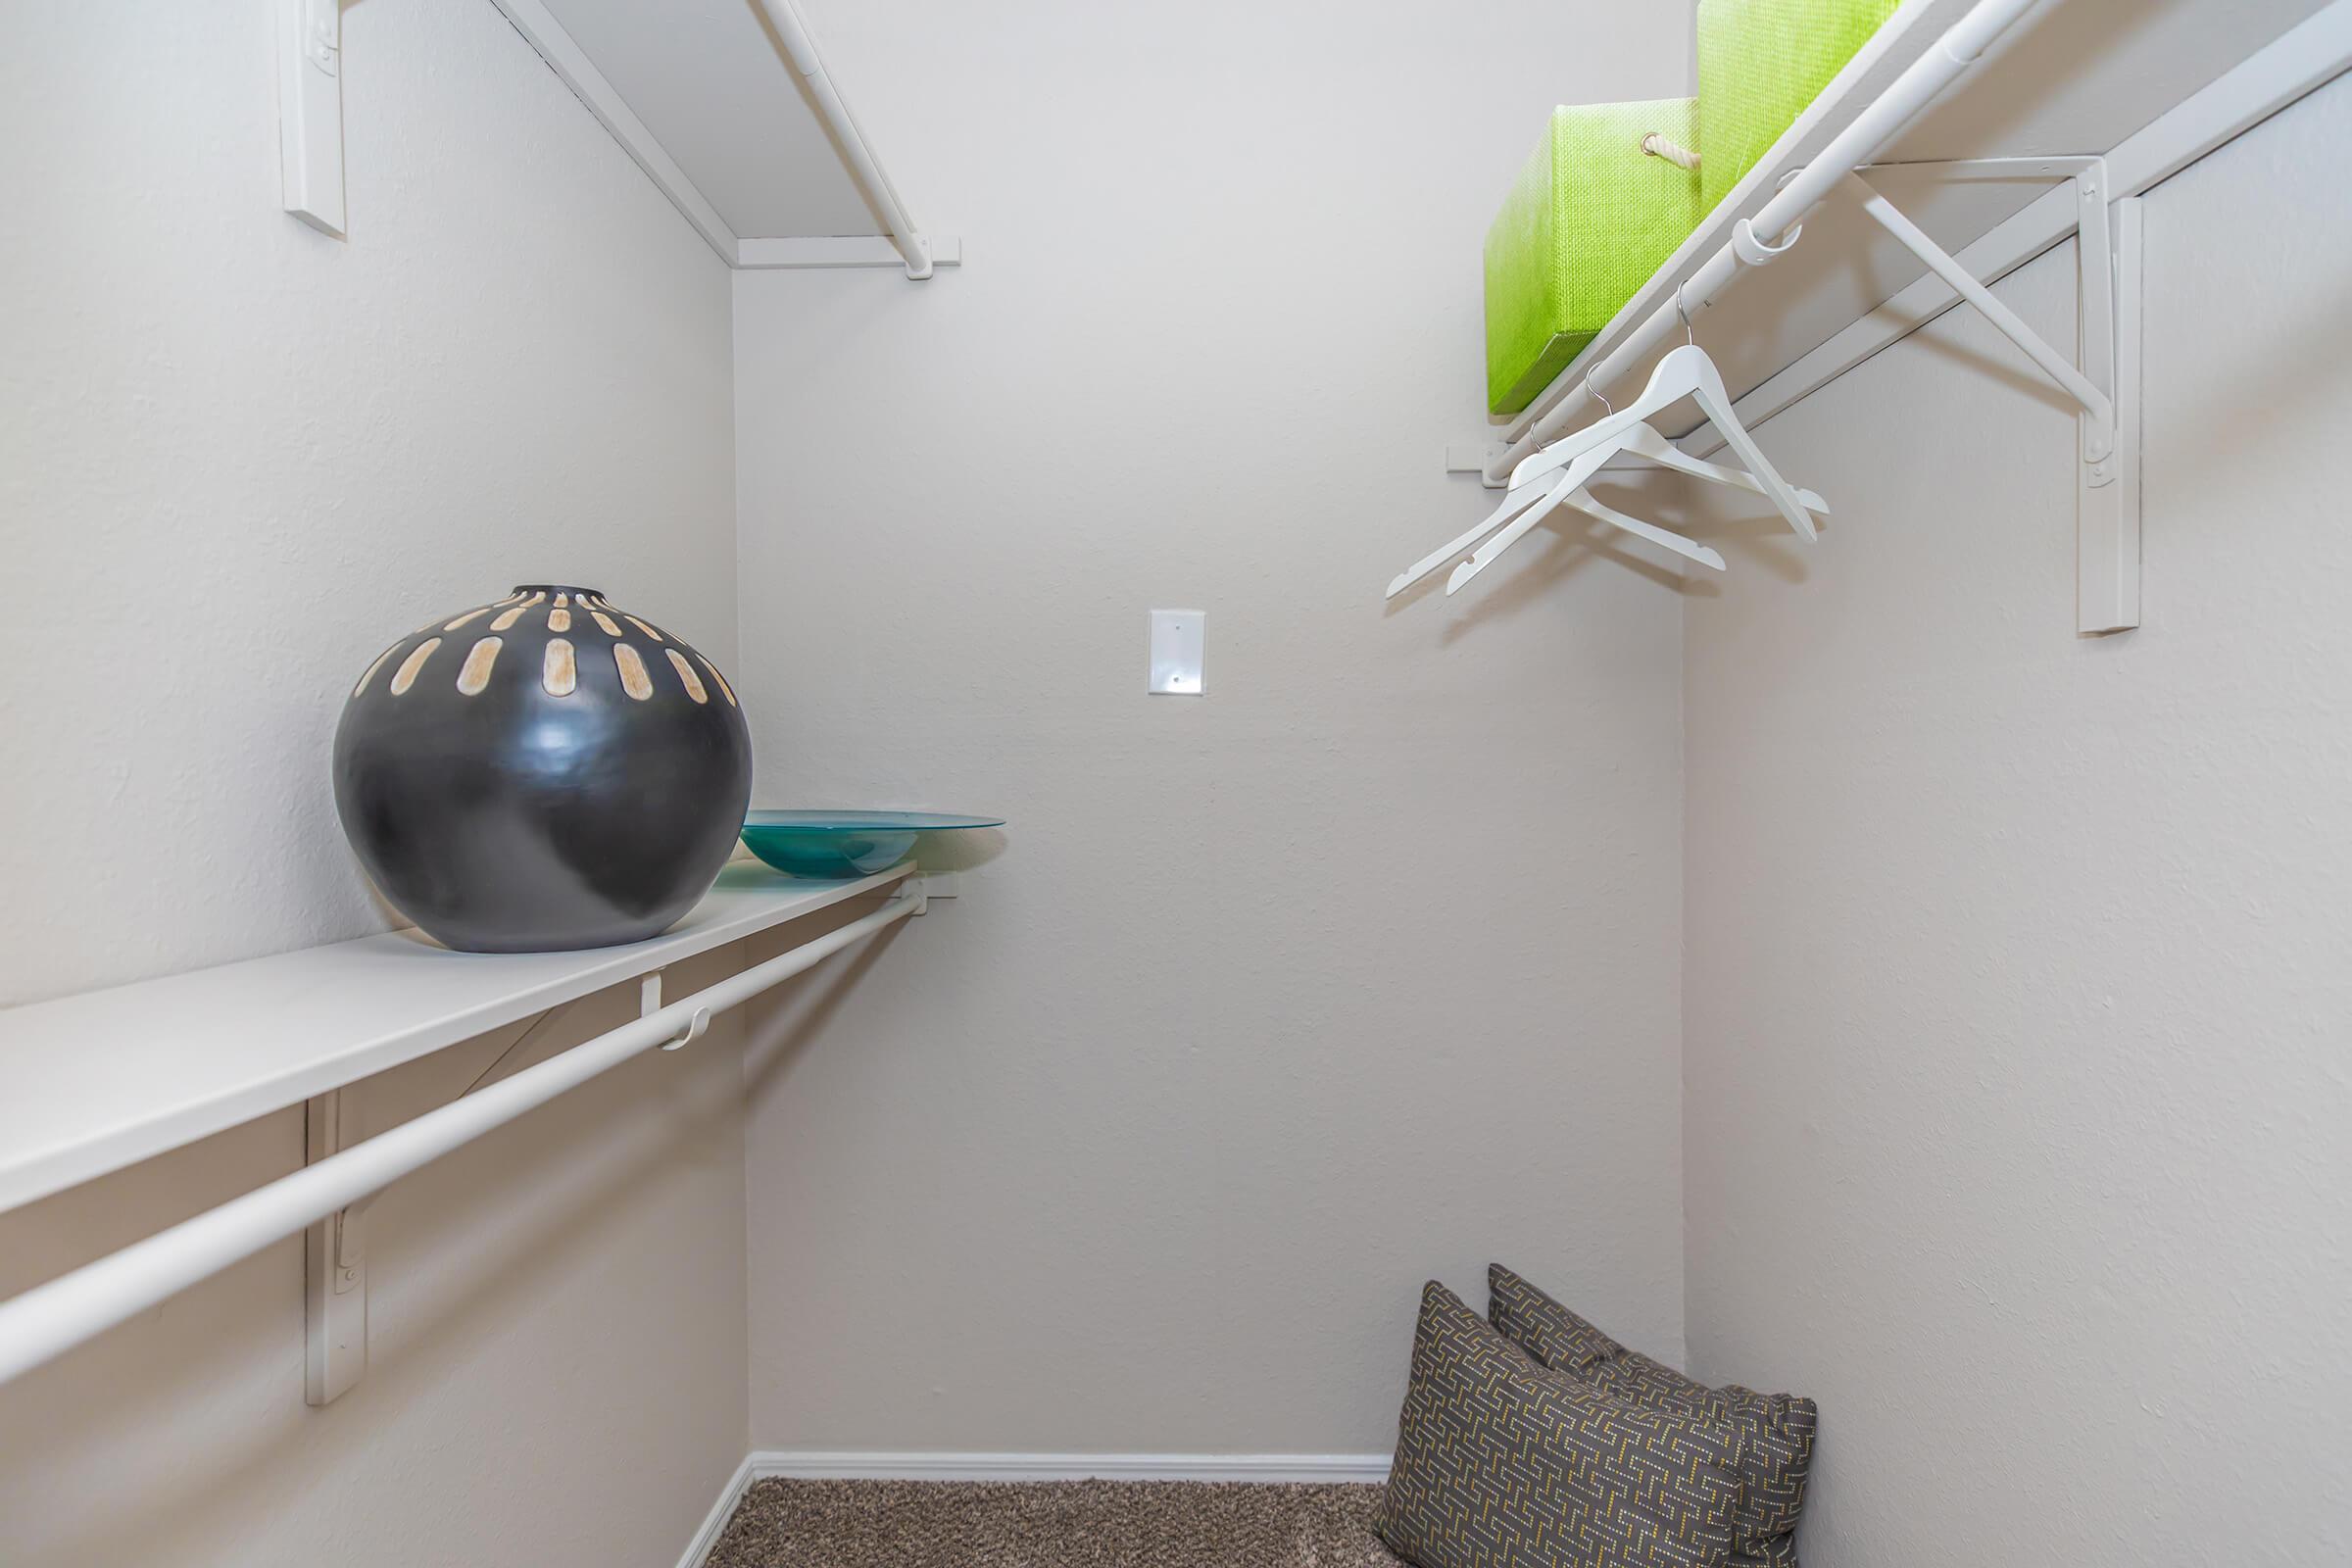 A carpeted bedroom closet with accessories at Rise Oak Creek.